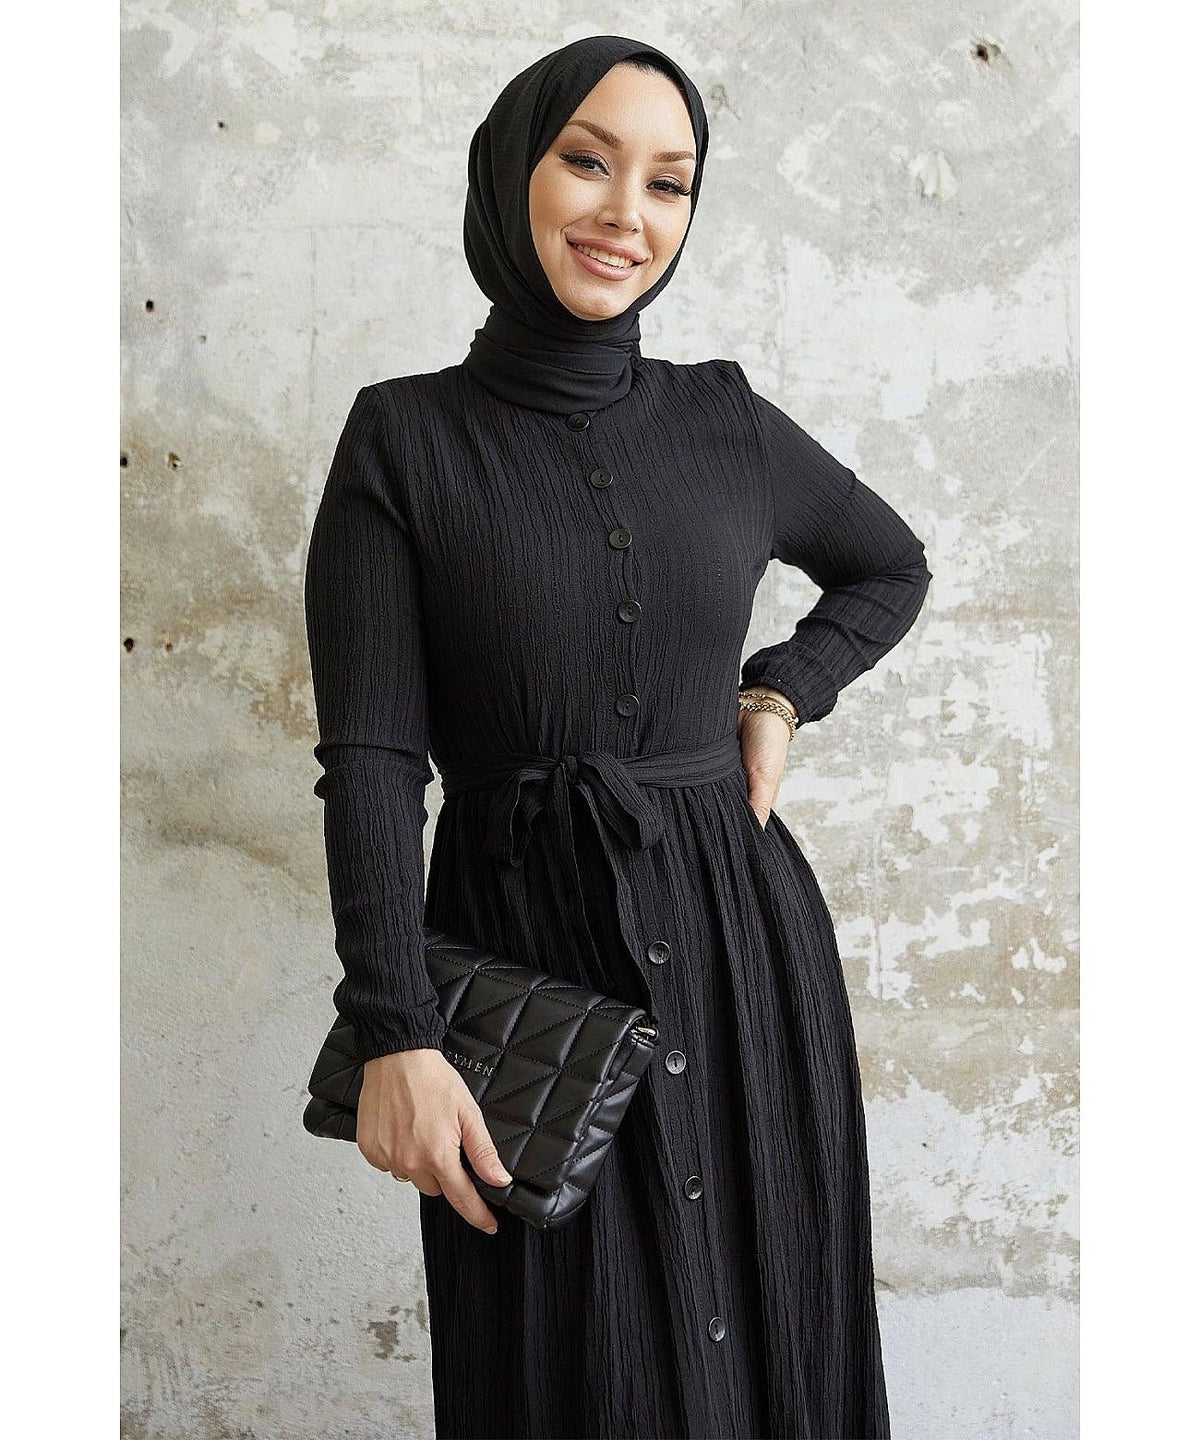 Textured Abaya Dress with Belt and Buttons - Black